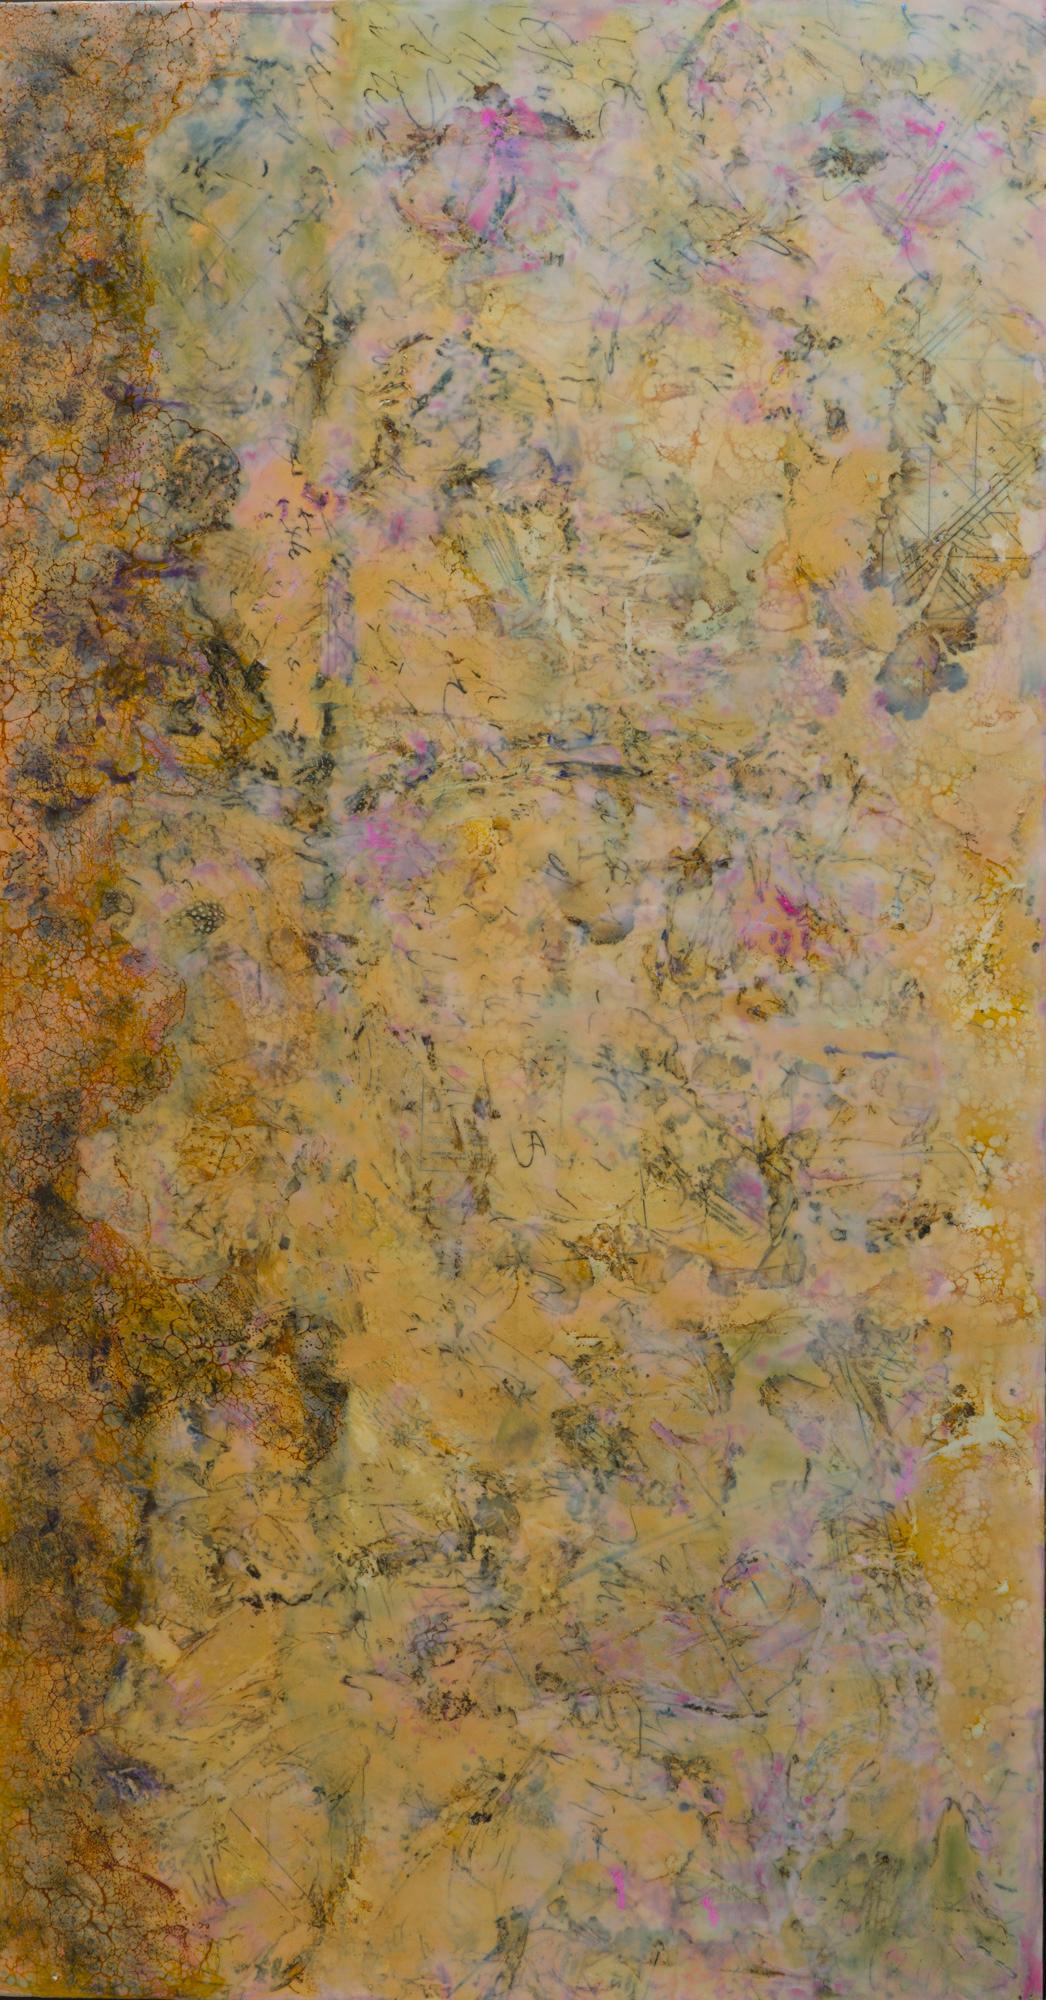 A large vertical encaustic abstract painting in beautiful yellow, pink, and teal hues by Pamela Gibson. This gorgeous painting brightens the room with its vibrant array of colors and textures, rendered with the unique glean of beeswax. Hidden